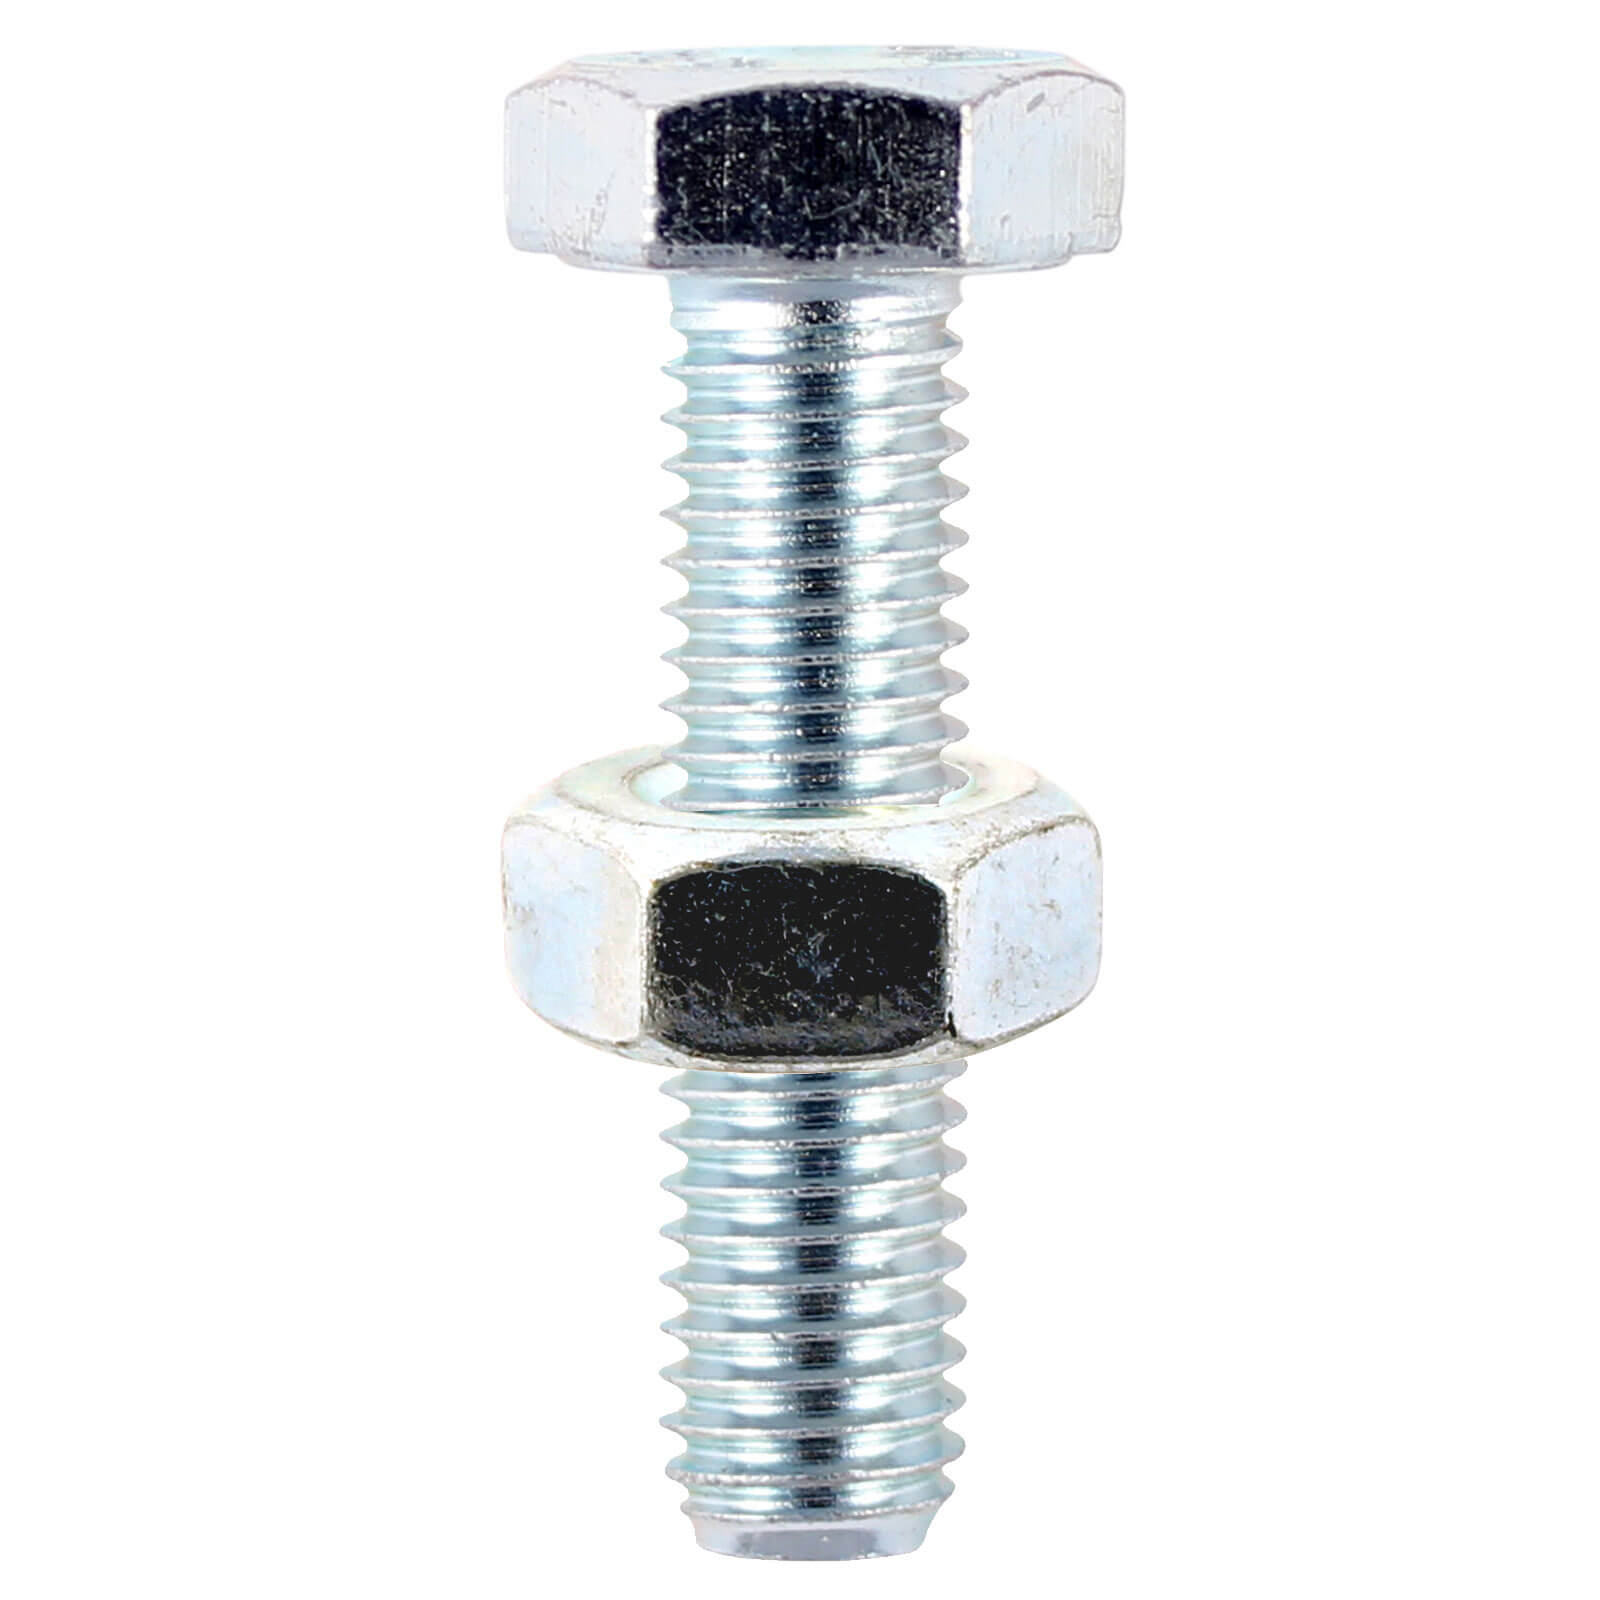 Hexagon Set Screw and Nuts Stainless Steel M10 100mm Pack of 2